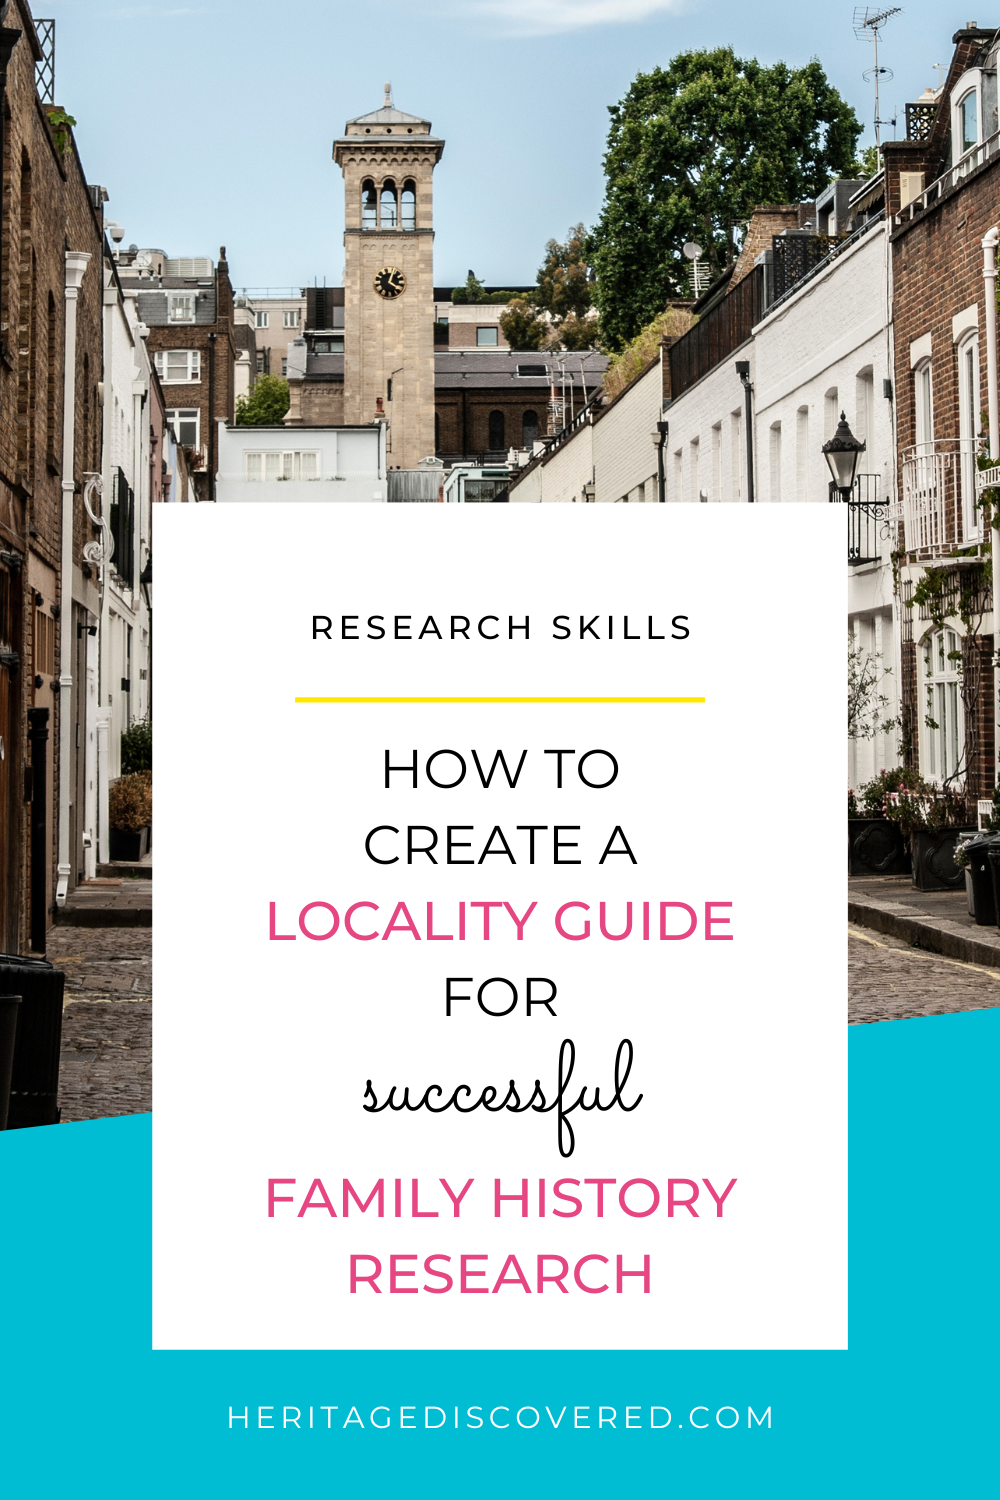 how-to-create-a-locality-guide-for-successful-family-history-research